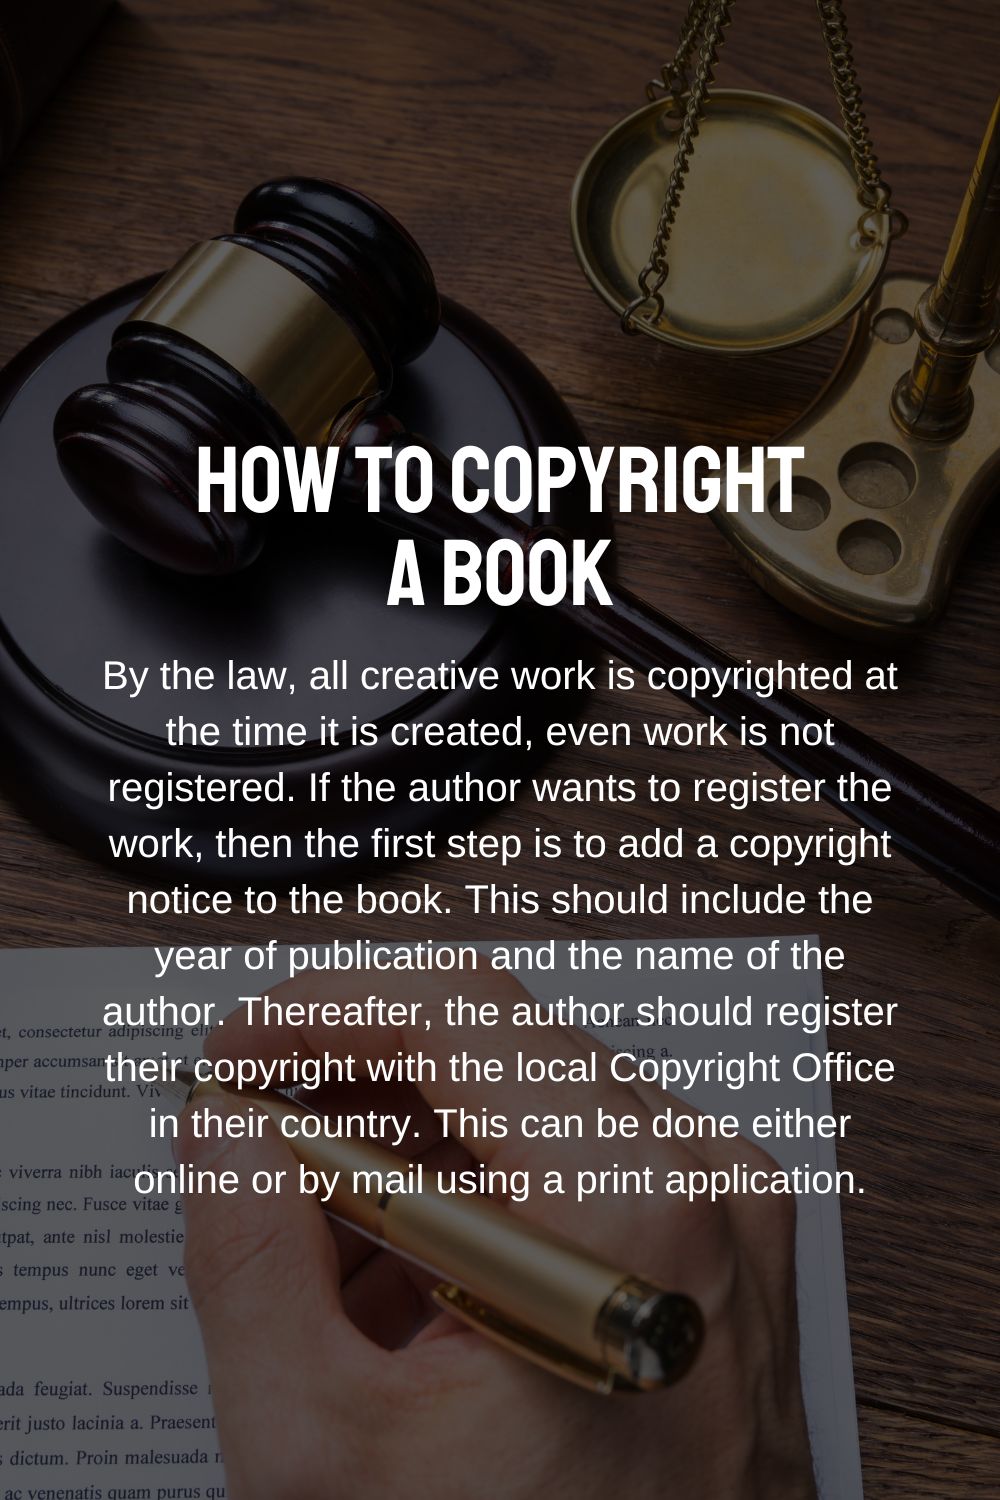 How to copyright a book